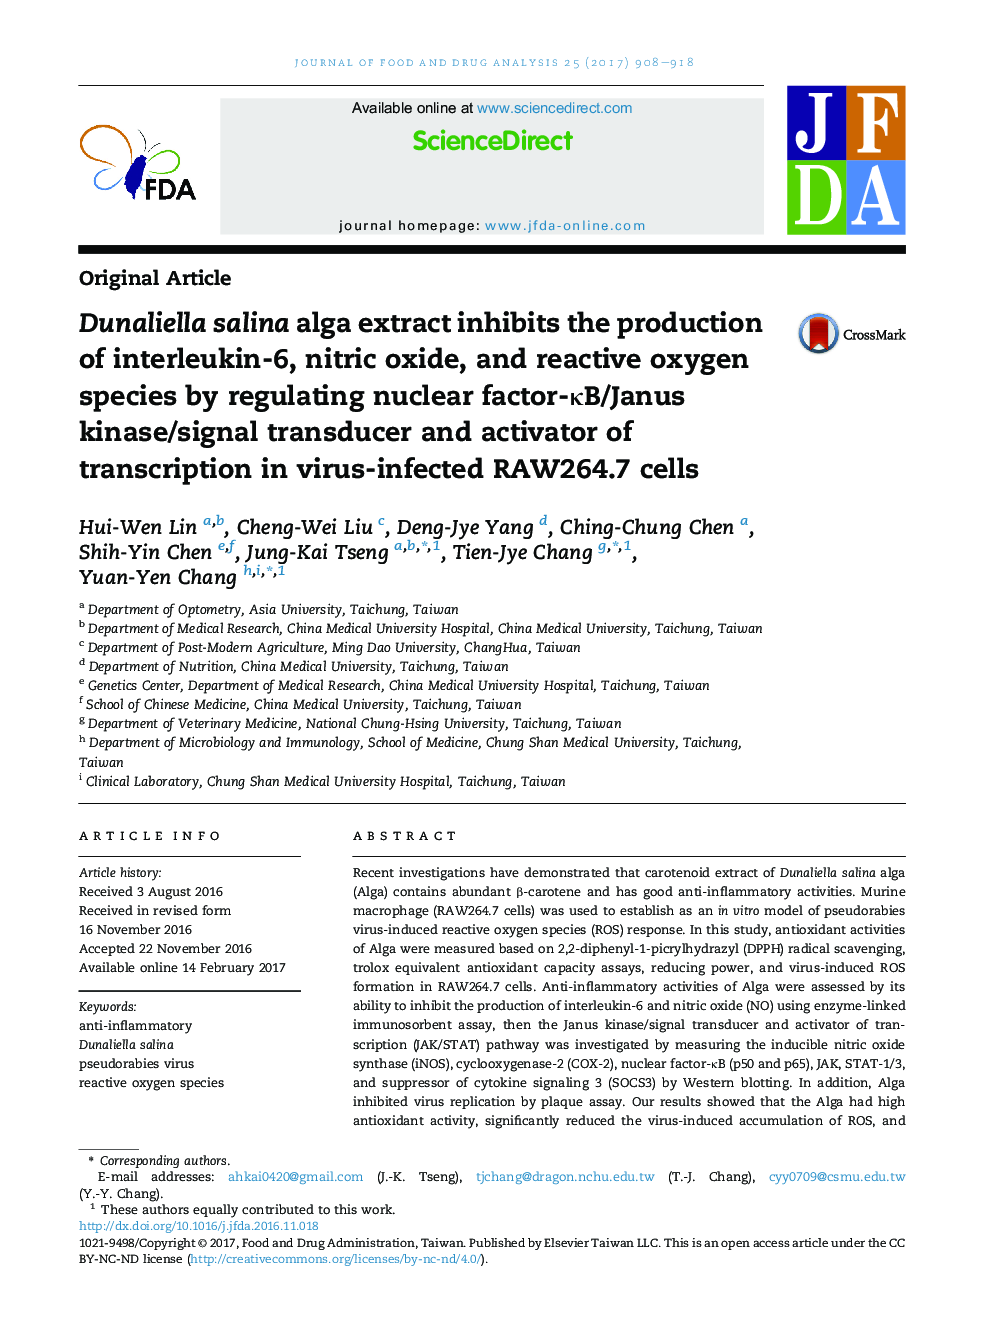 Dunaliella salina alga extract inhibits the production of interleukin-6, nitric oxide, and reactive oxygen species by regulating nuclear factor-ÎºB/Janus kinase/signal transducer and activator of transcription in virus-infected RAW264.7Â cells